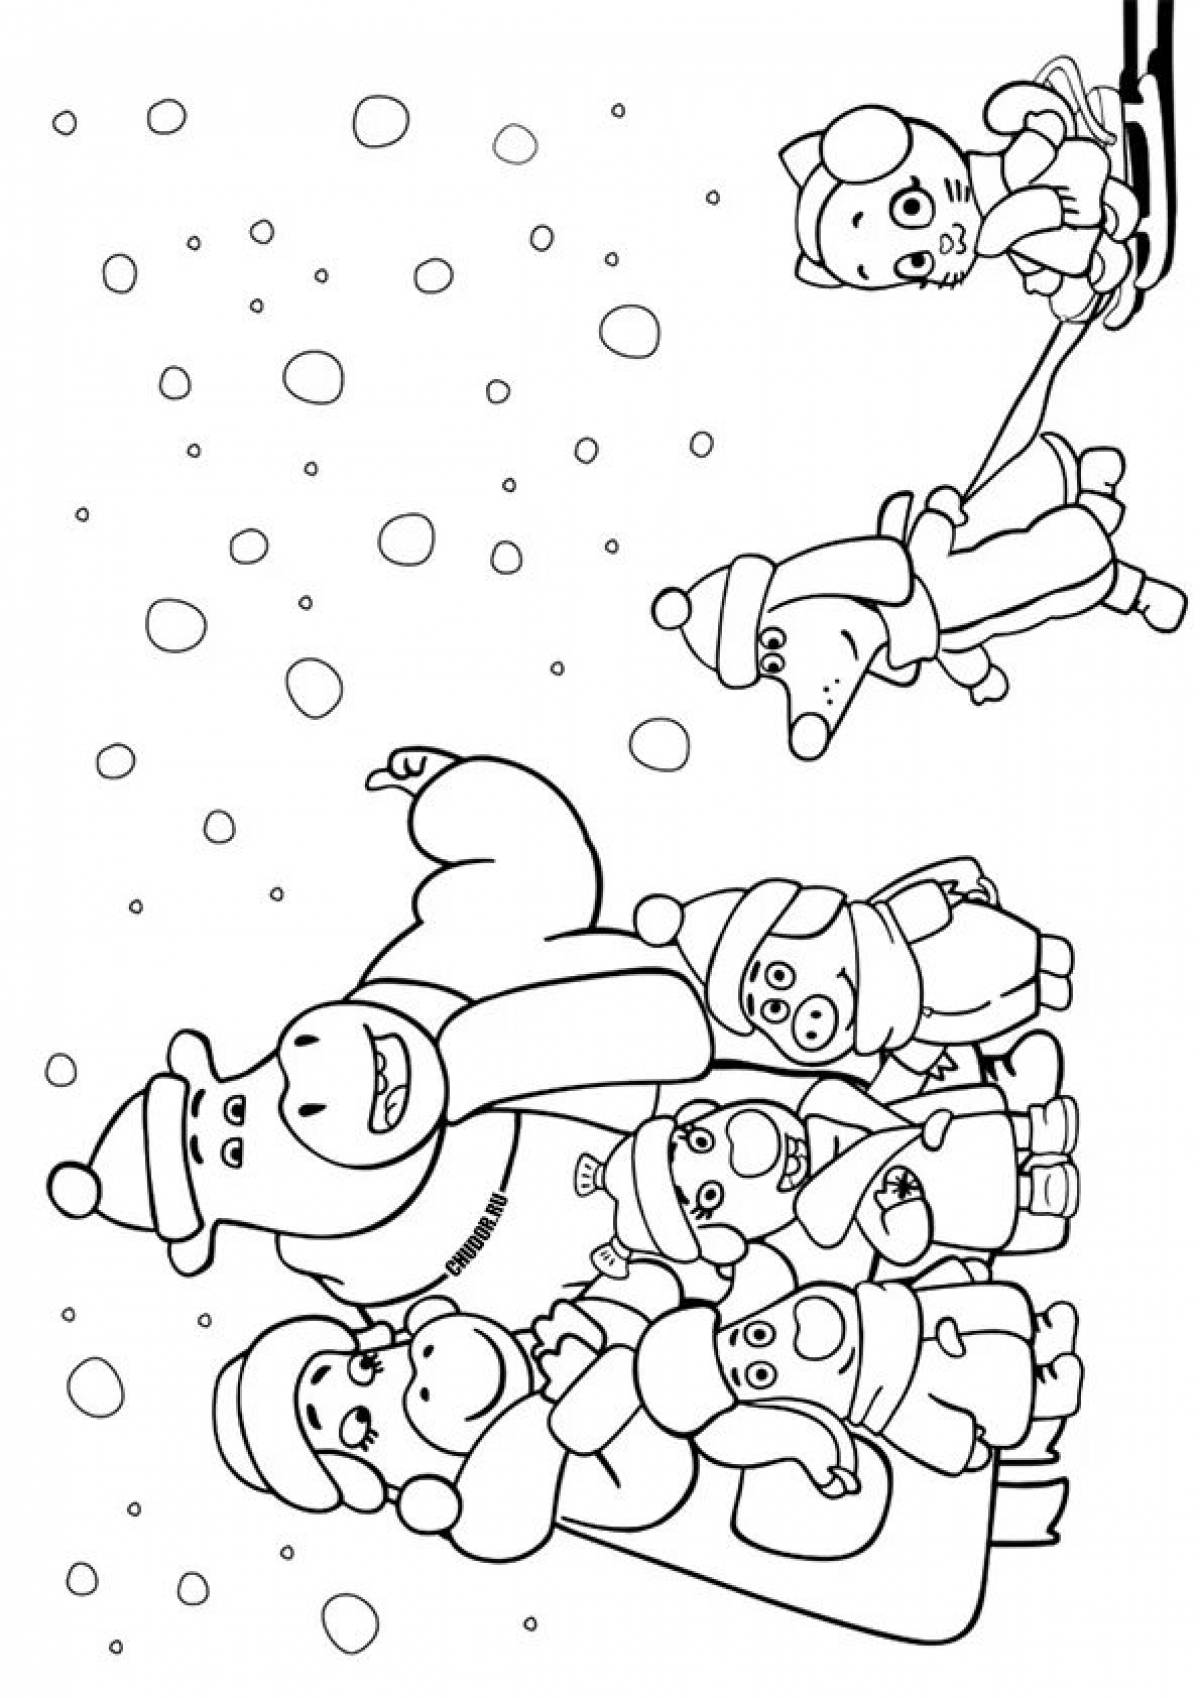 Coloring pages bo and zo